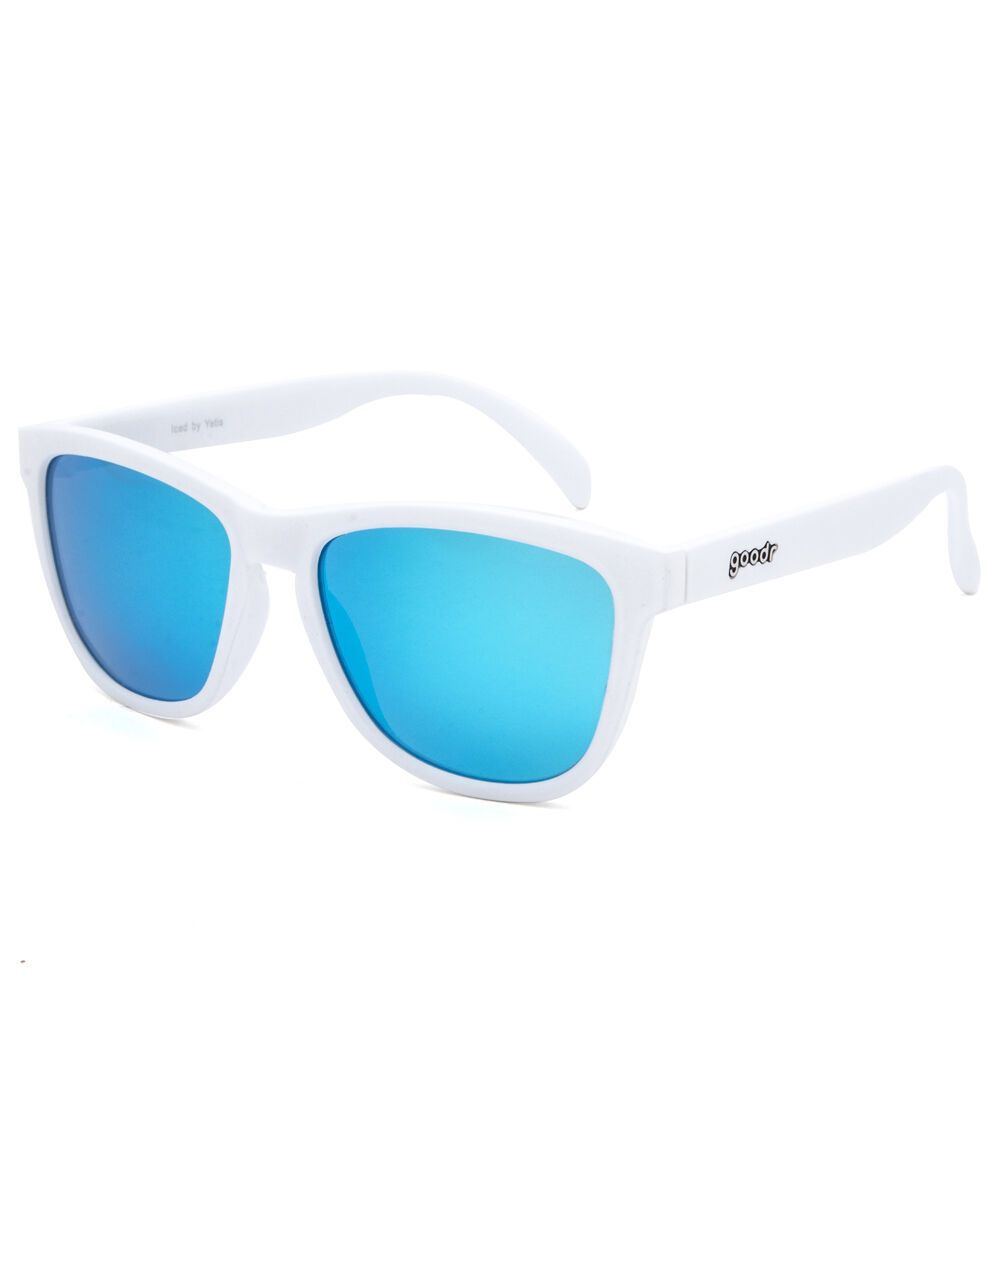 GOODR The OGs Iced By Yetis Polarized Sunglasses | Tillys